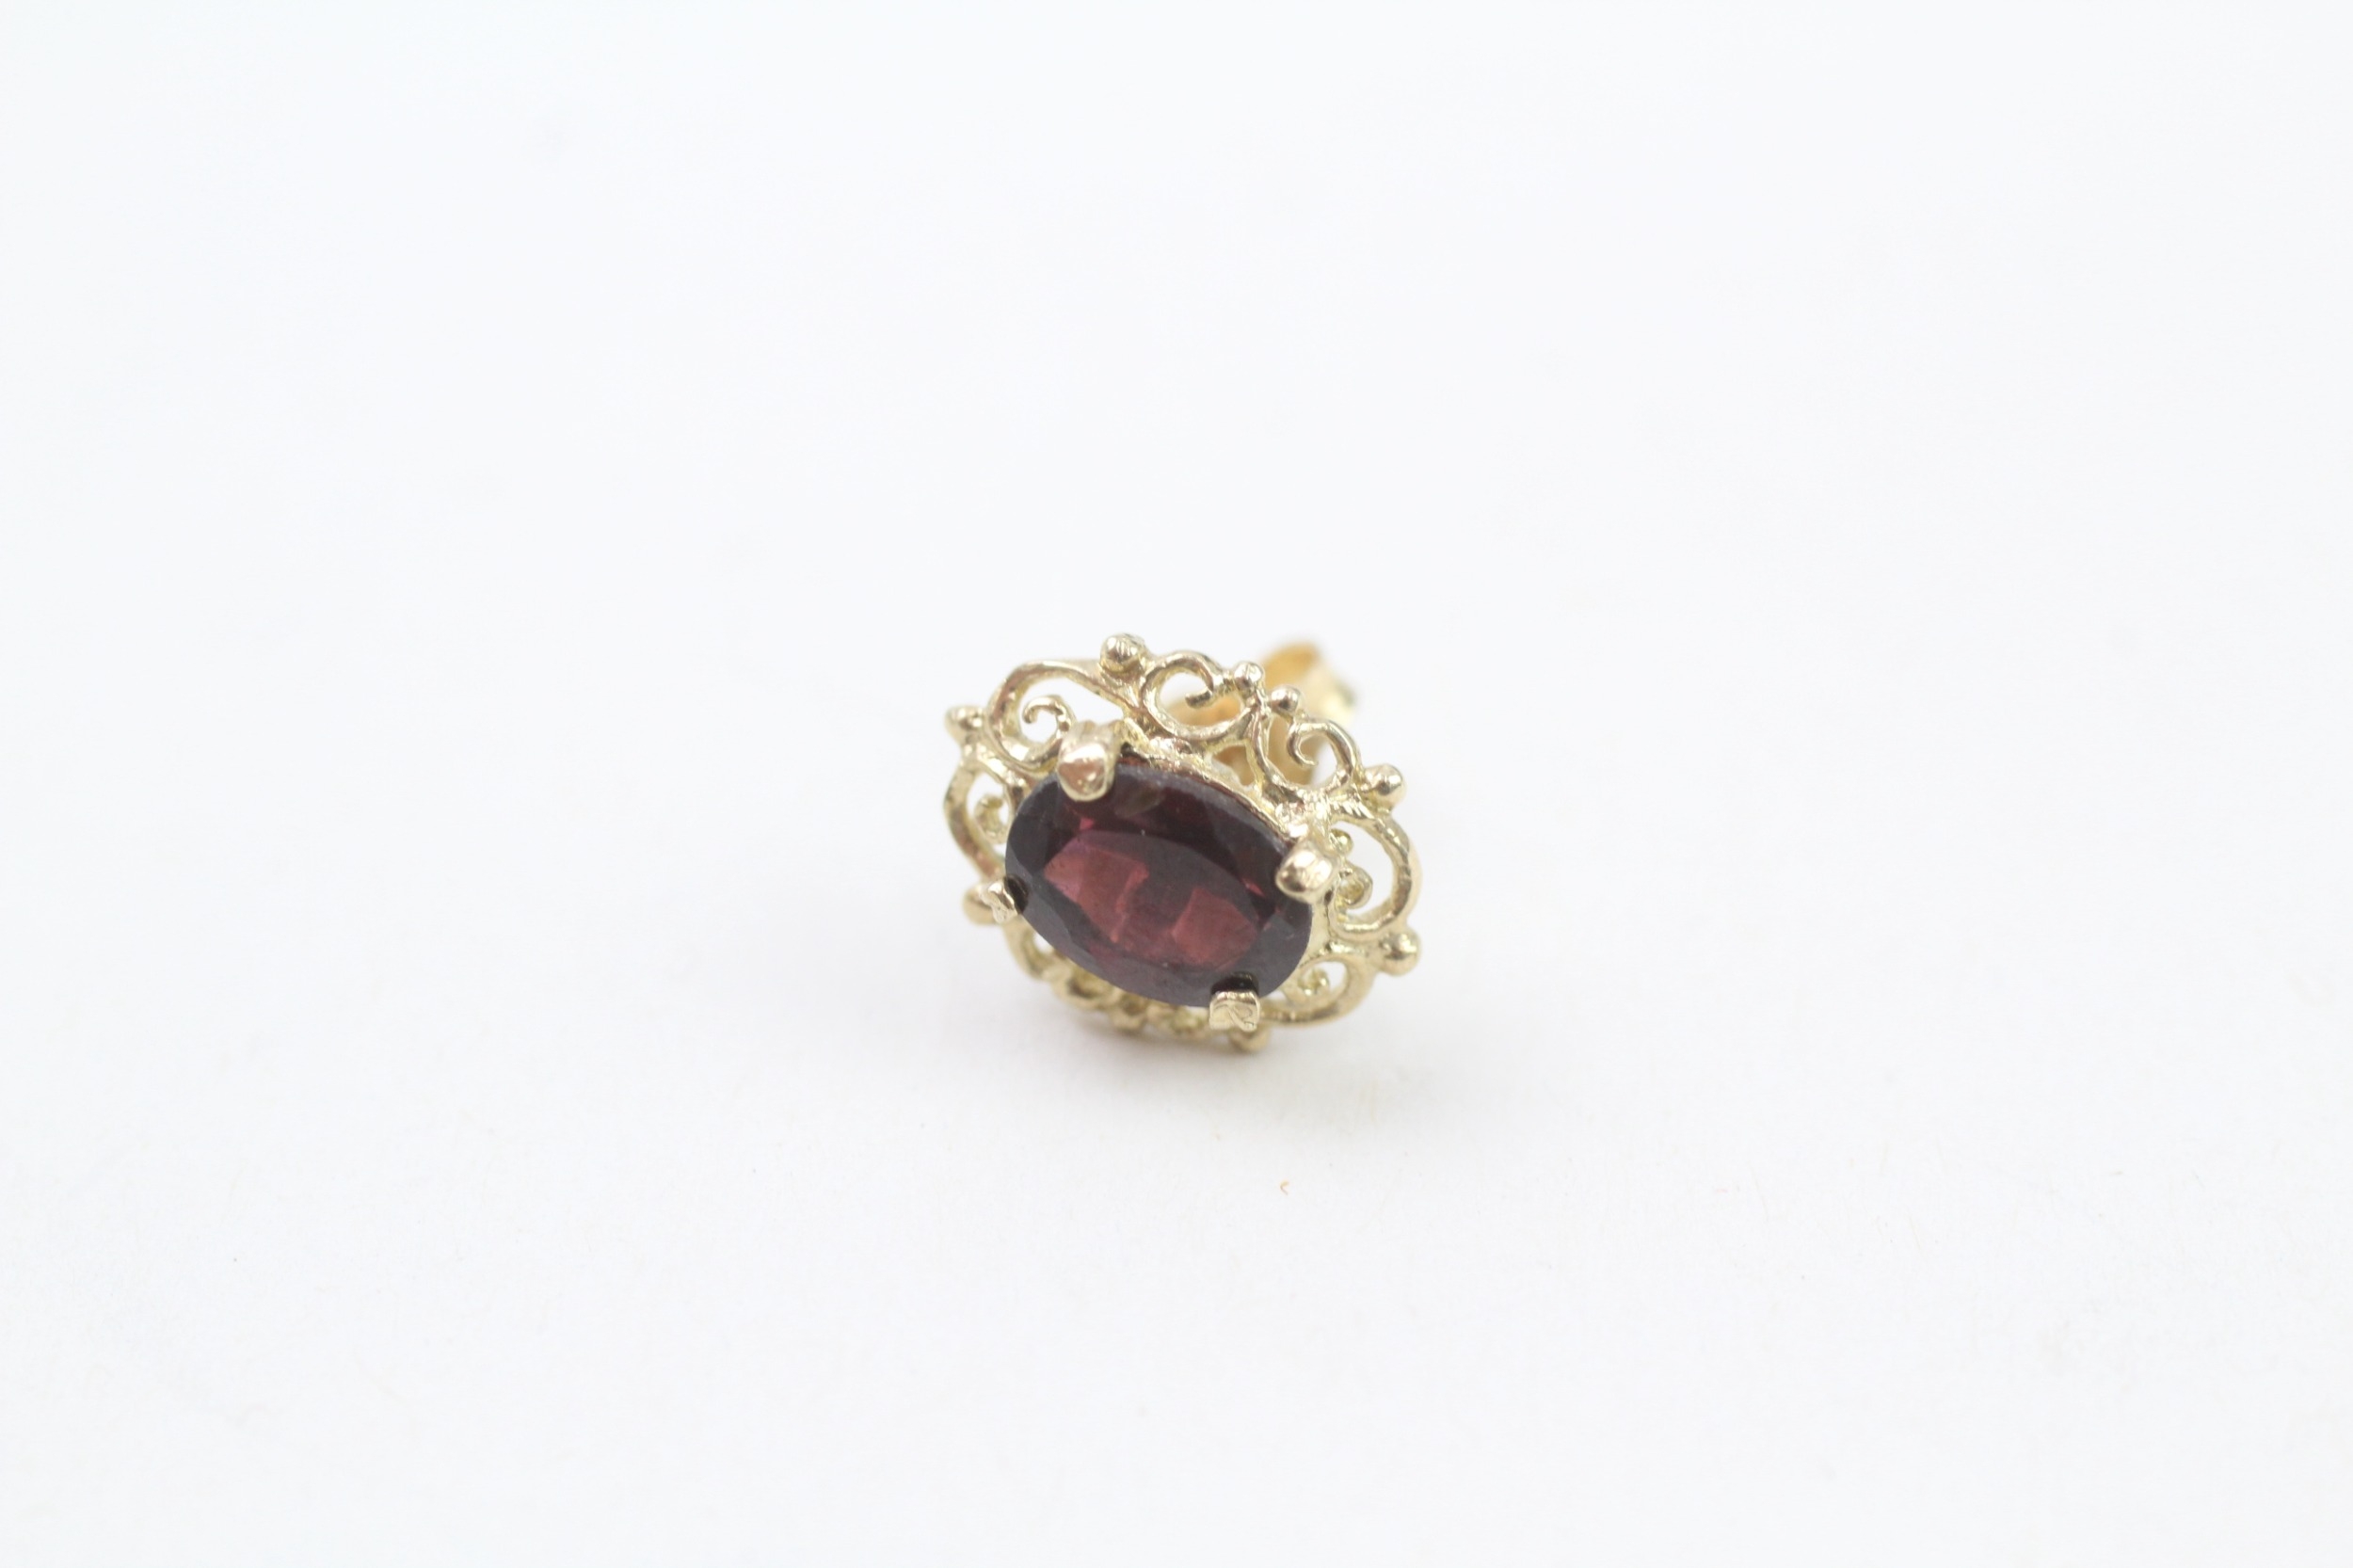 9ct gold oval cut garnet stud earrings with a scroll patterned border (1.7g) - Image 2 of 4